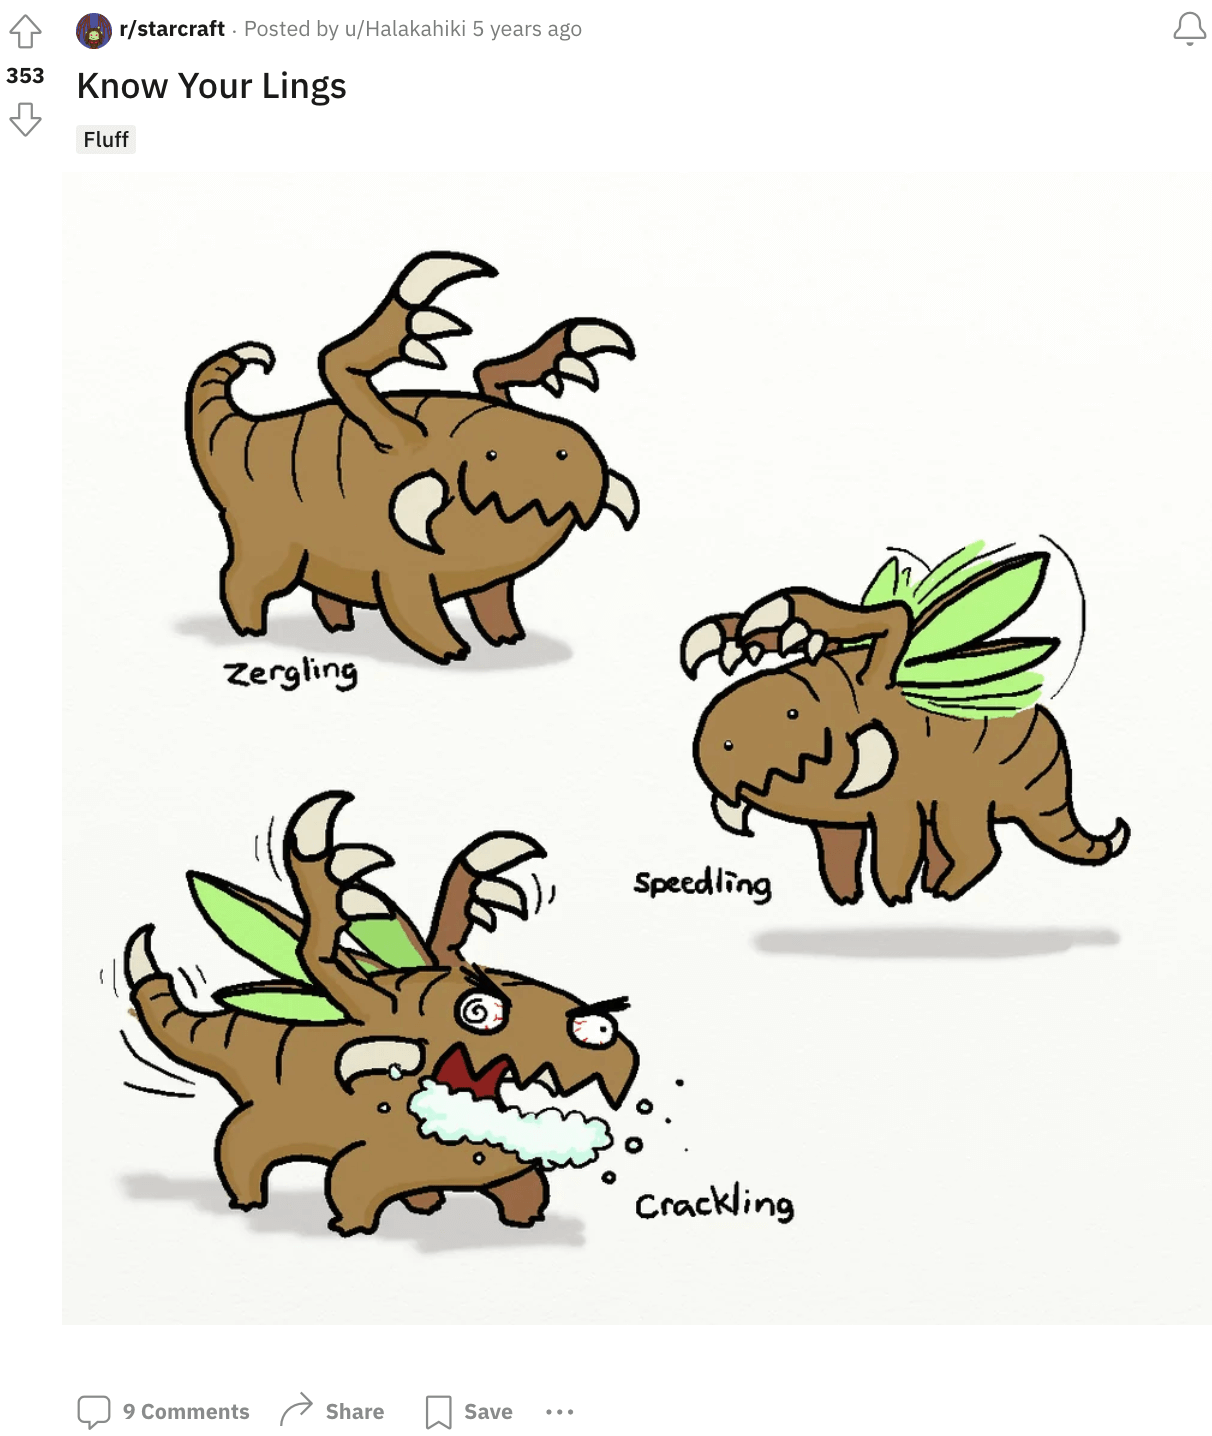 Fanart of the various lings, including cracklings (by ketrinadrawsalot)